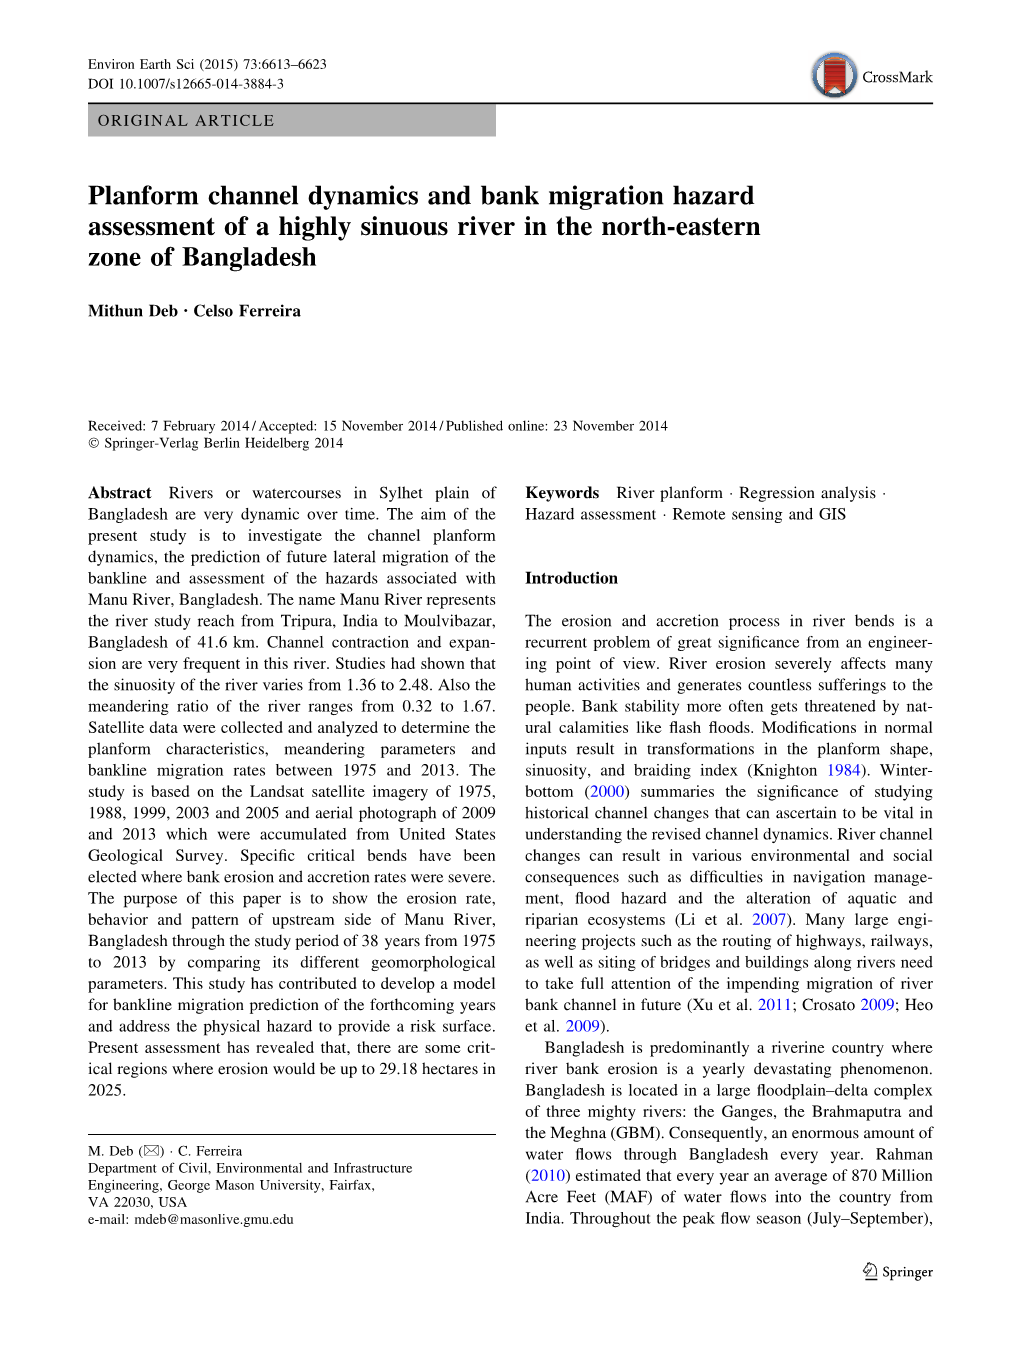 Planform Channel Dynamics and Bank Migration Hazard Assessment of a Highly Sinuous River in the North-Eastern Zone of Bangladesh